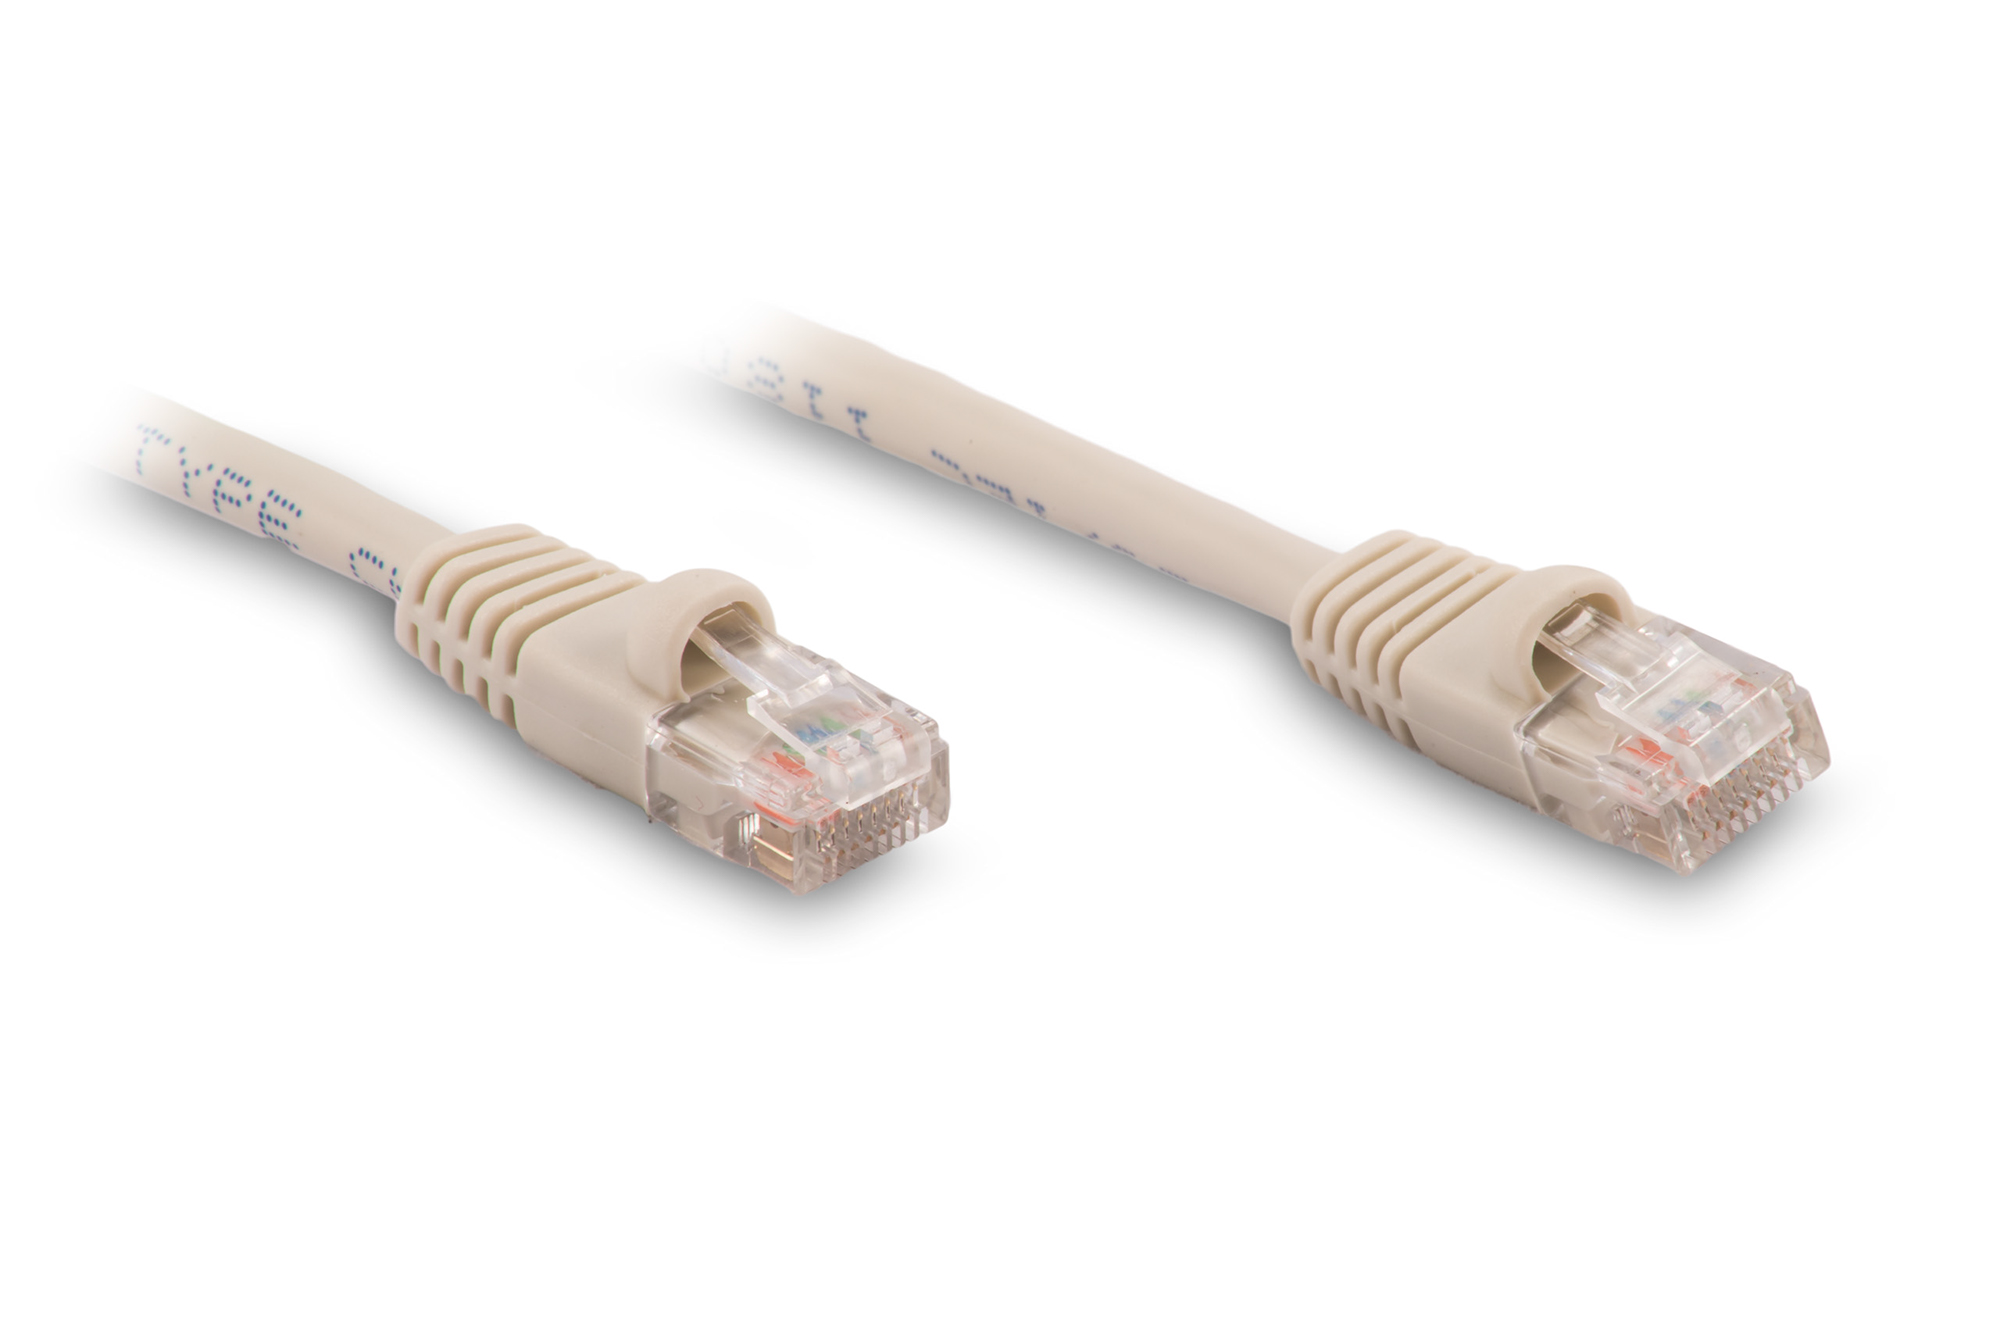 1ft Cat6 Ethernet Patch Cable - Gray Color - Snagless Boot